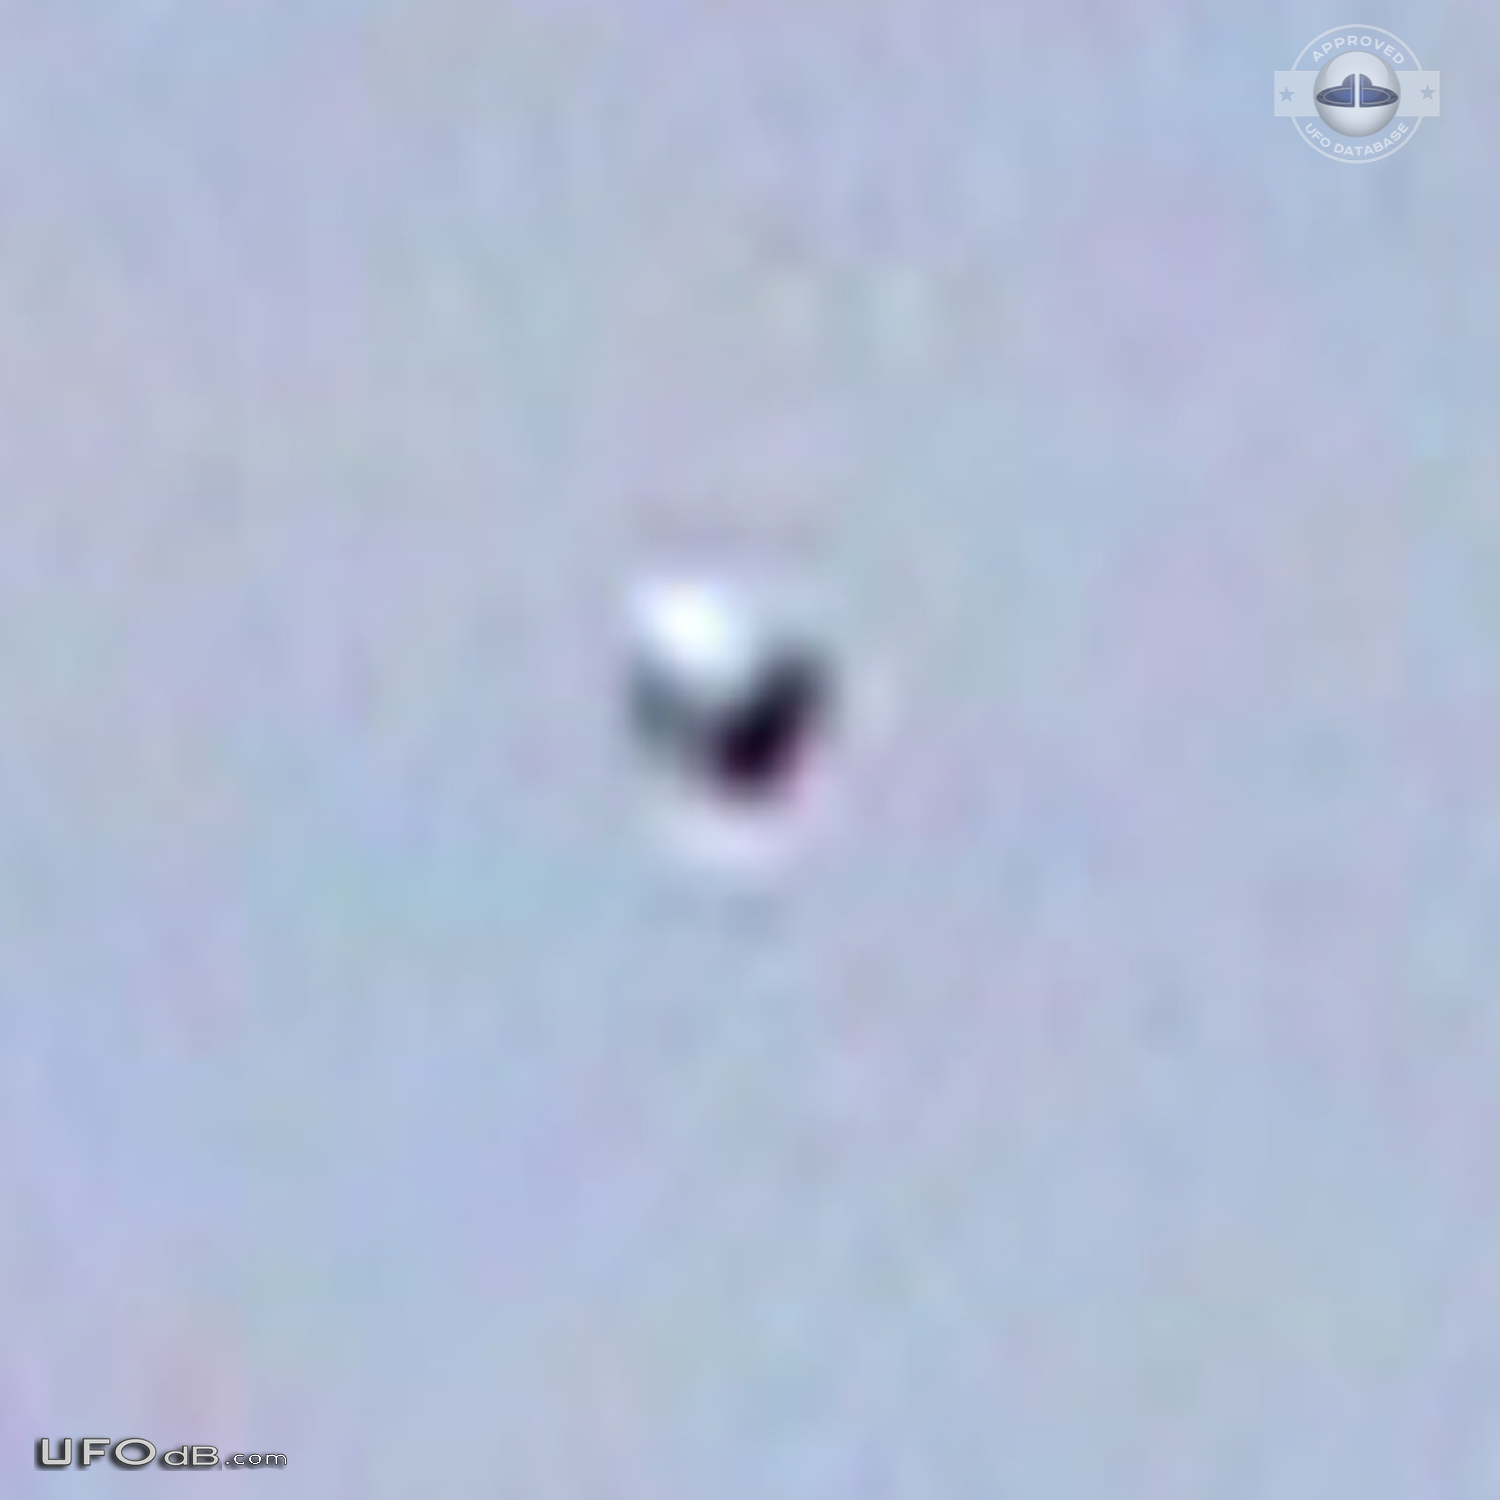 While fishing in Puntarenas Costa Rica a photo captures UFO UFO Picture #834-4